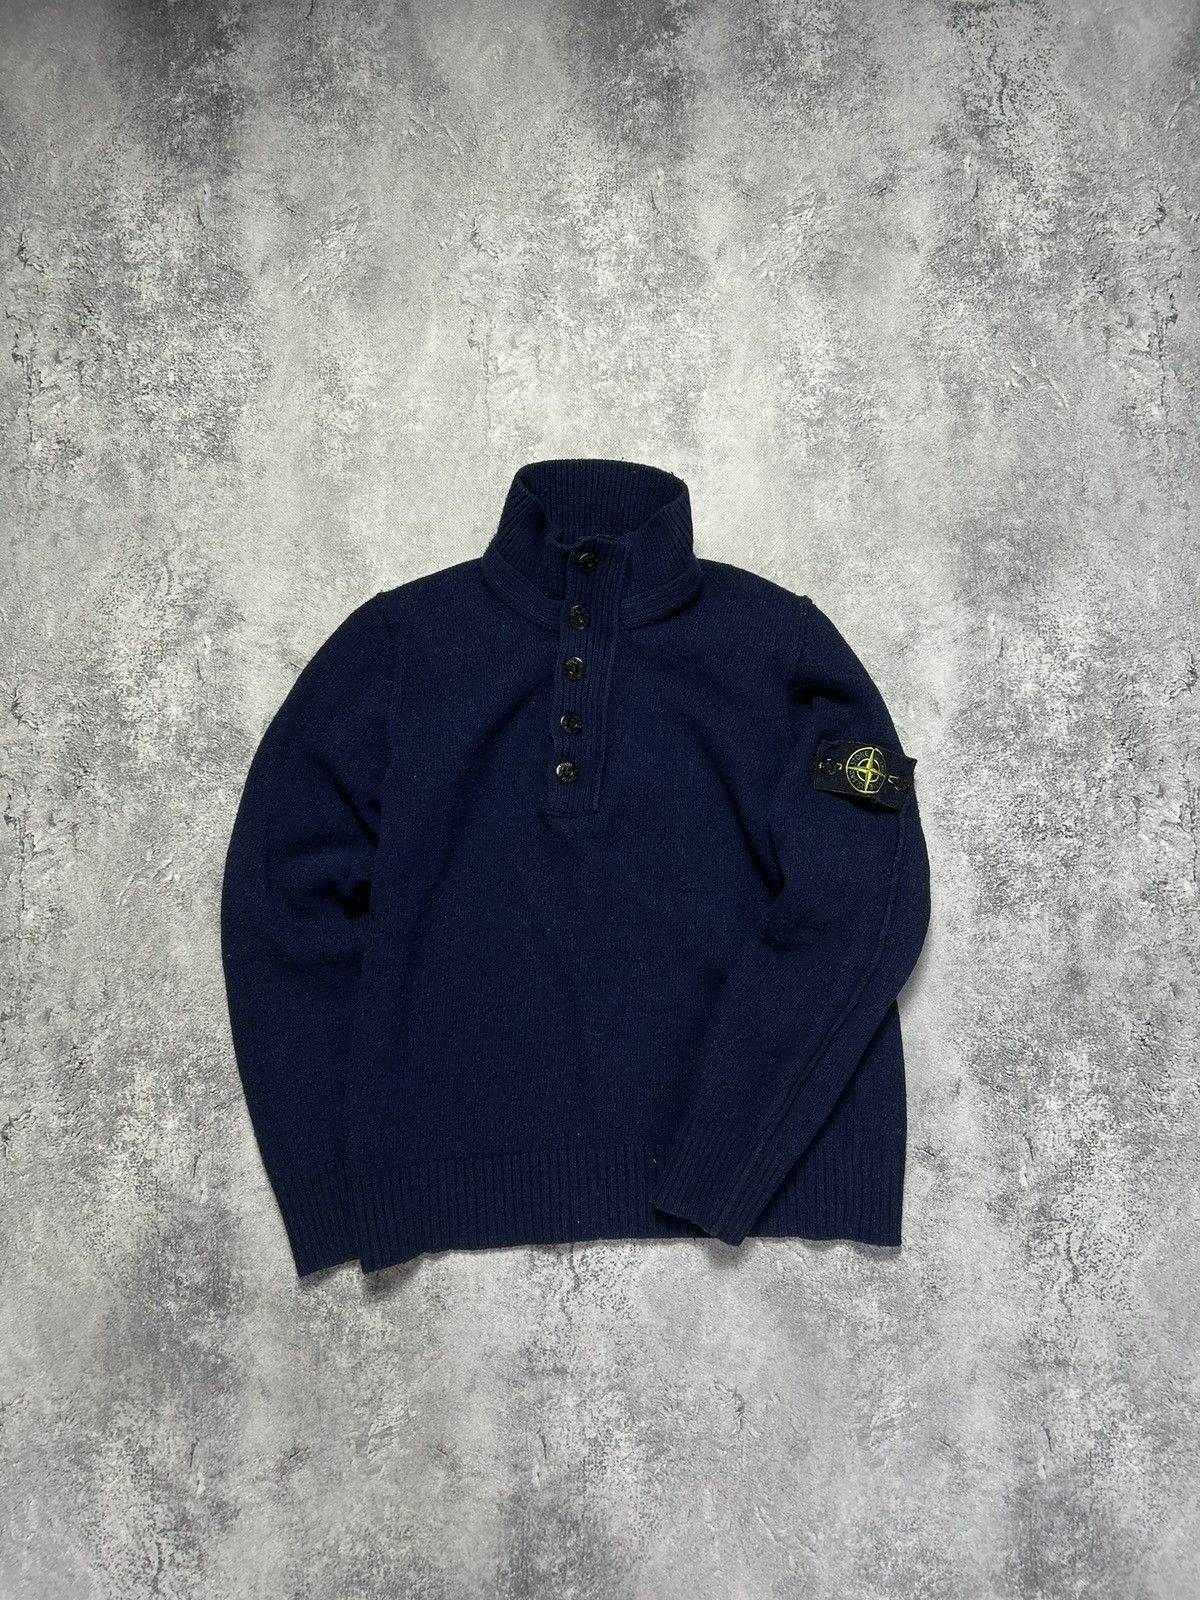 Stone Island Vintage Stone Island Knitted Zip Sweater Wool | Grailed